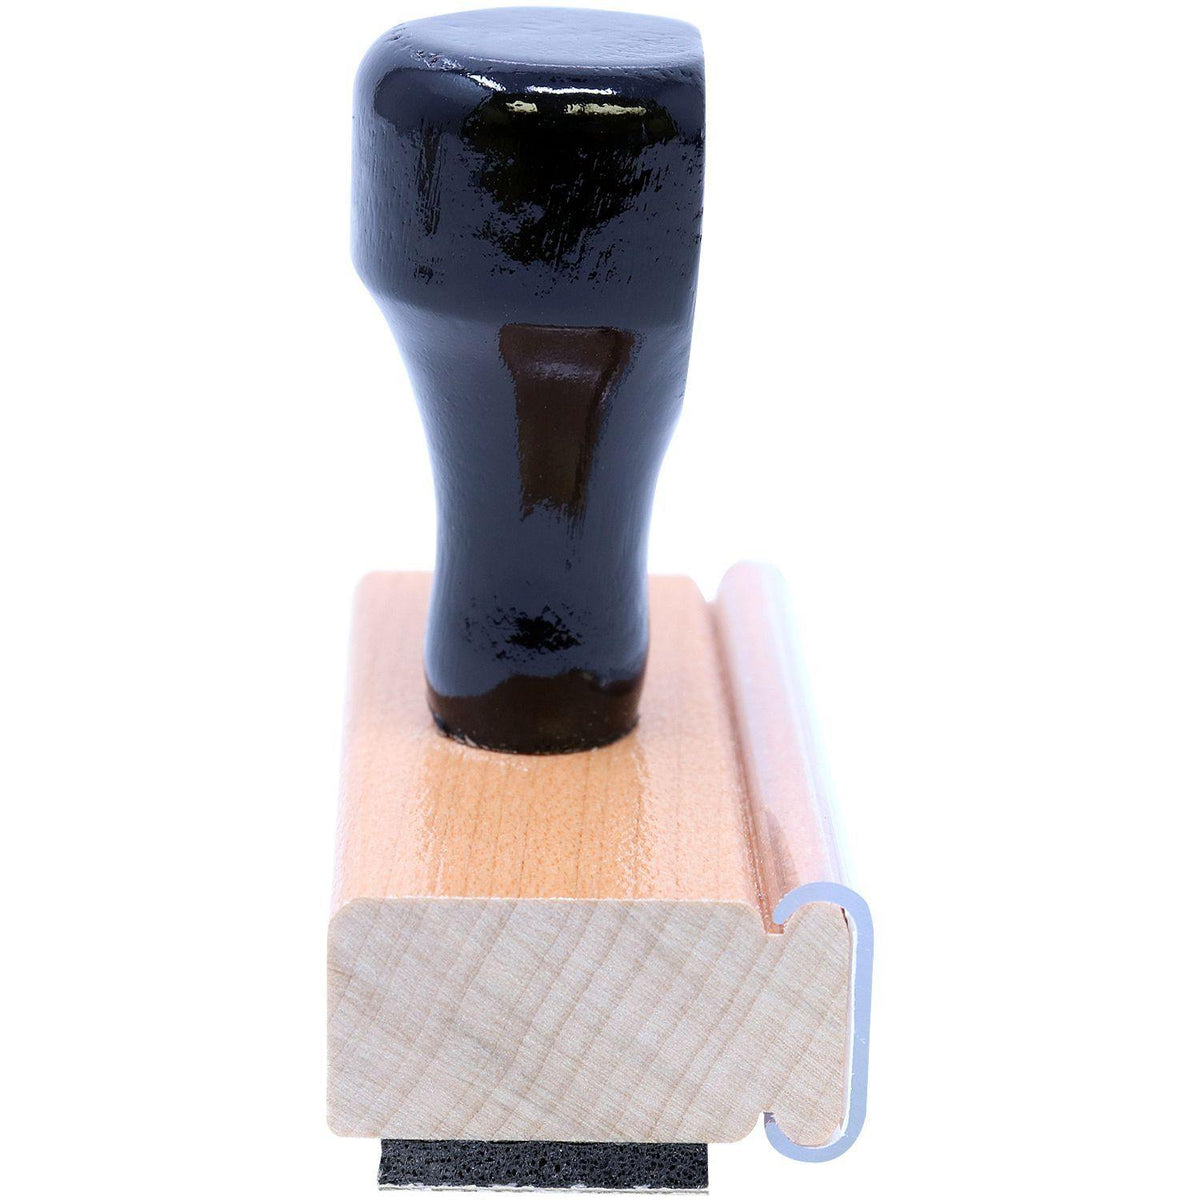 Round Arrow Rubber Stamp - Engineer Seal Stamps - Brand_Acorn, Impression Size_Small, Stamp Type_Regular Stamp, Type of Use_General